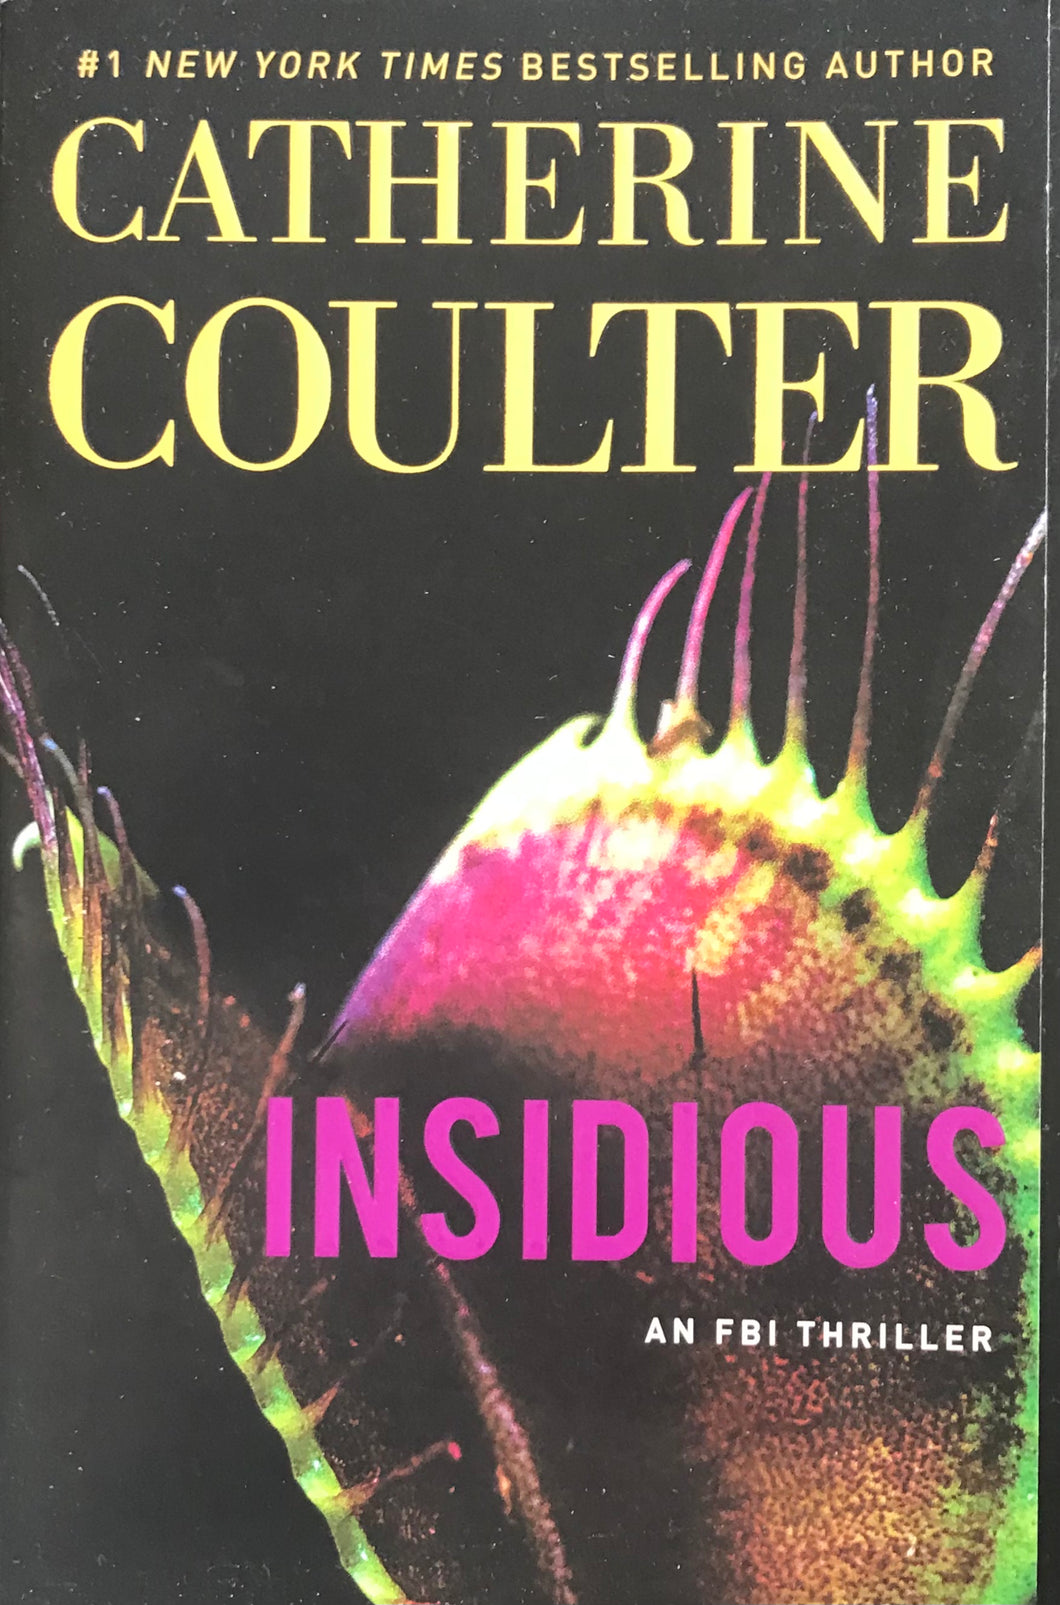 Insidious, Catherine Coulter